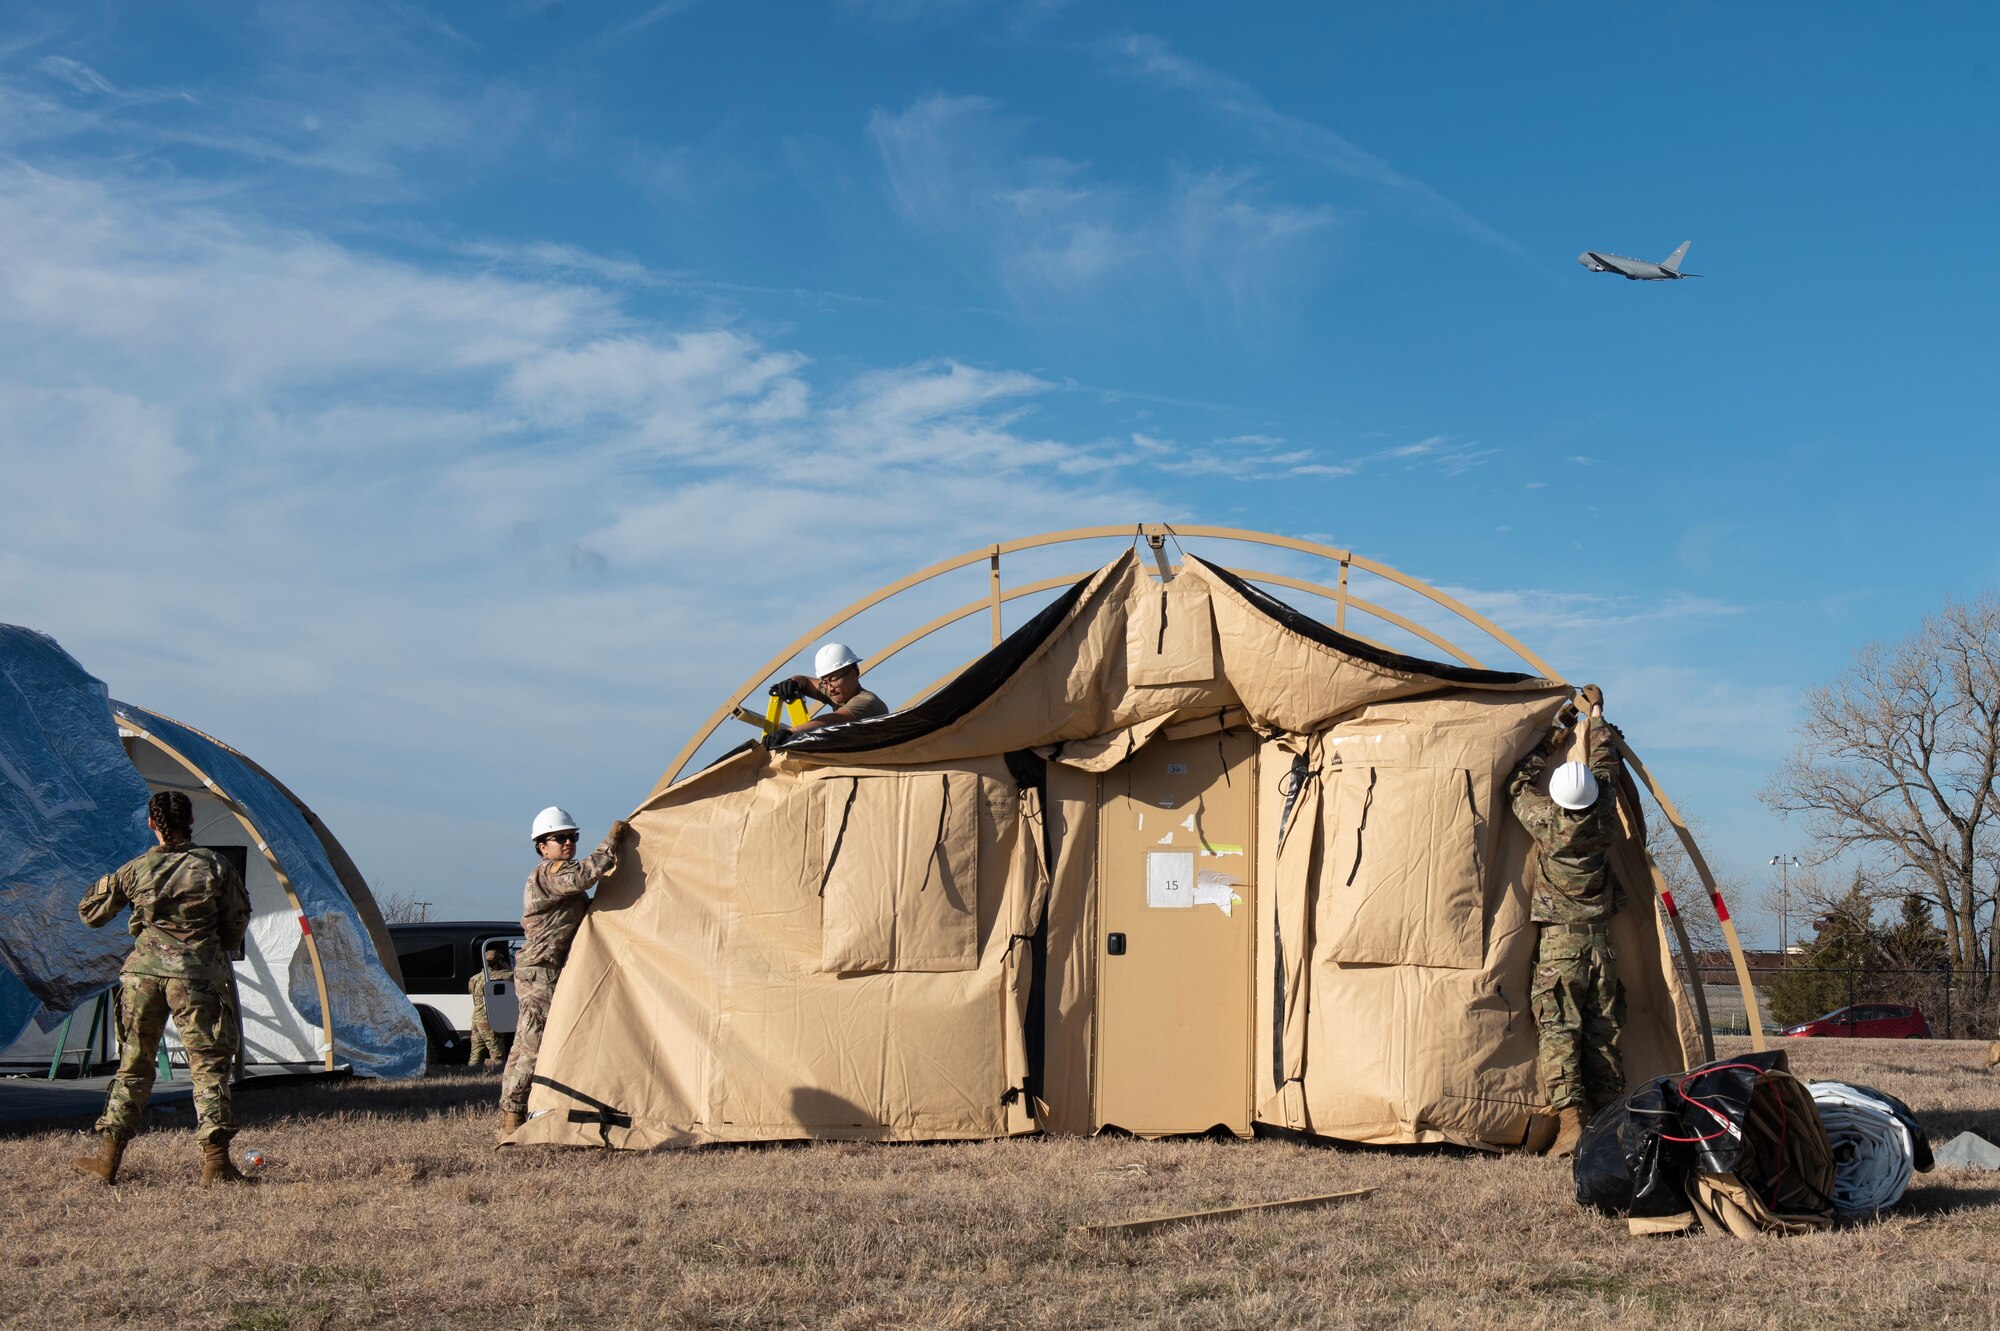 Airmen from the 22nd Civil Engineer Squadron set up a tent in preparation for Exercise Lethal Pride at McConnell Air Force Base, Kansas, March 22, 2023. Lethal Pride is a week-long exercise to test McConnell’s capabilities and readiness. (U.S. Air Force photo by Staff Sgt. Tryphena Mayhugh)